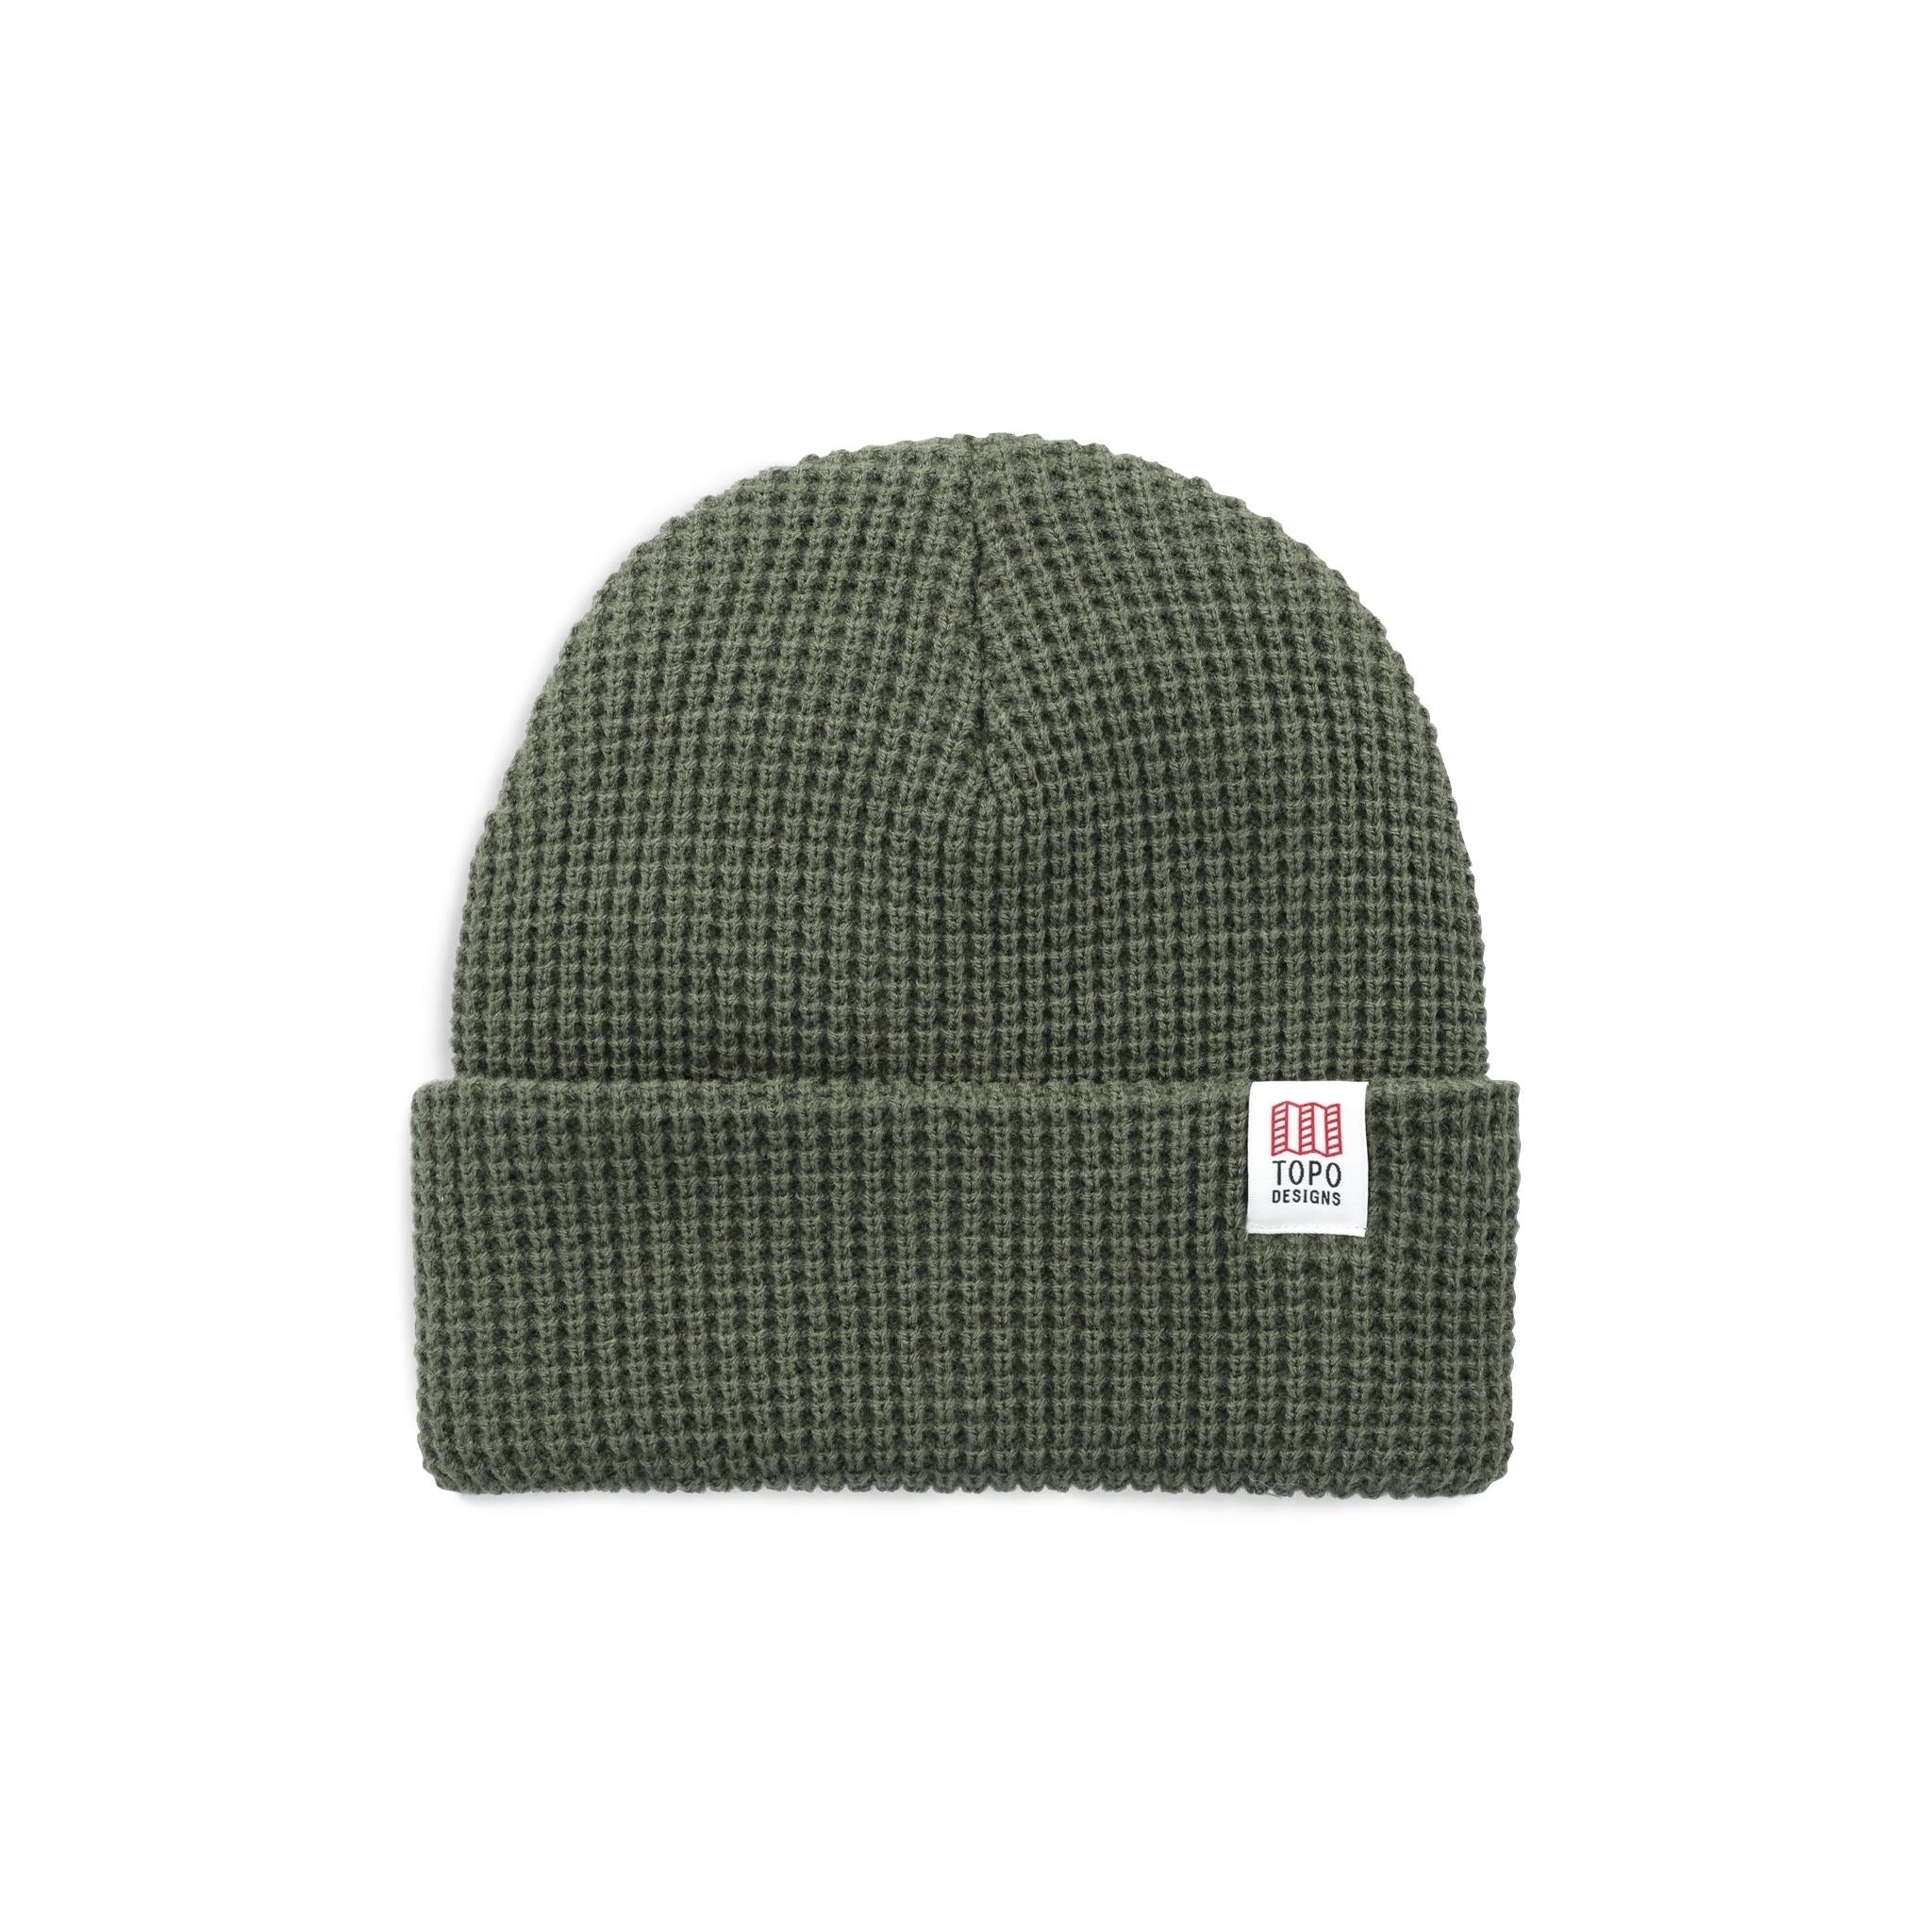 Front View of Topo Designs Waffle Knit Beanie in "Beetle"